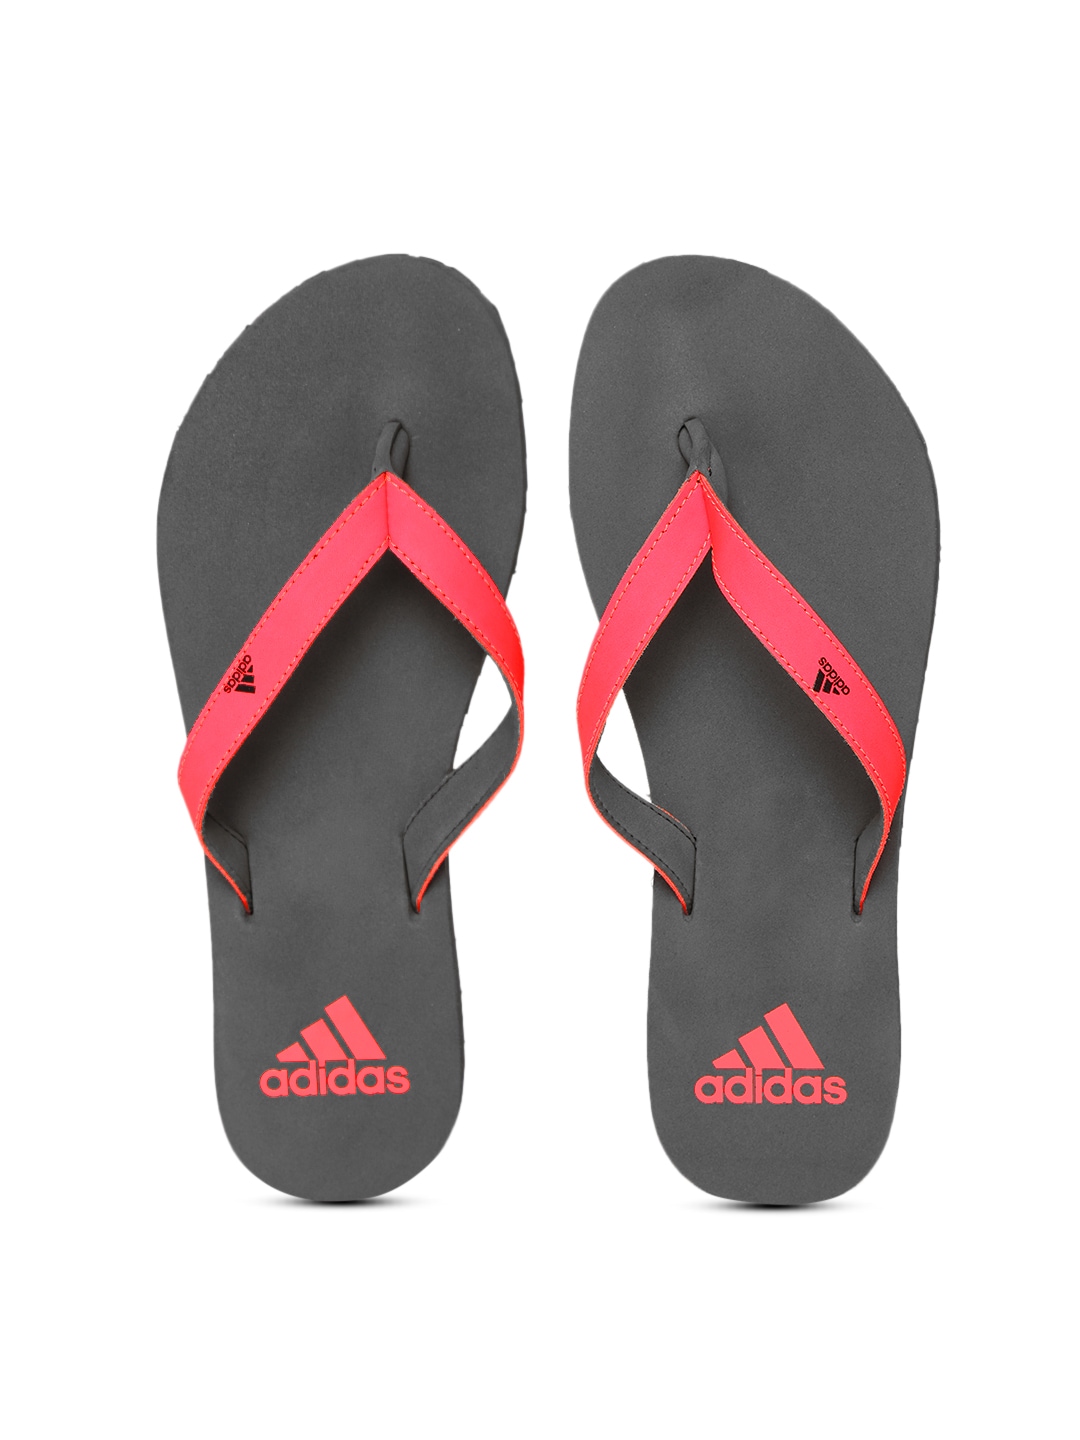 adidas slippers for women Sale,up to 46 